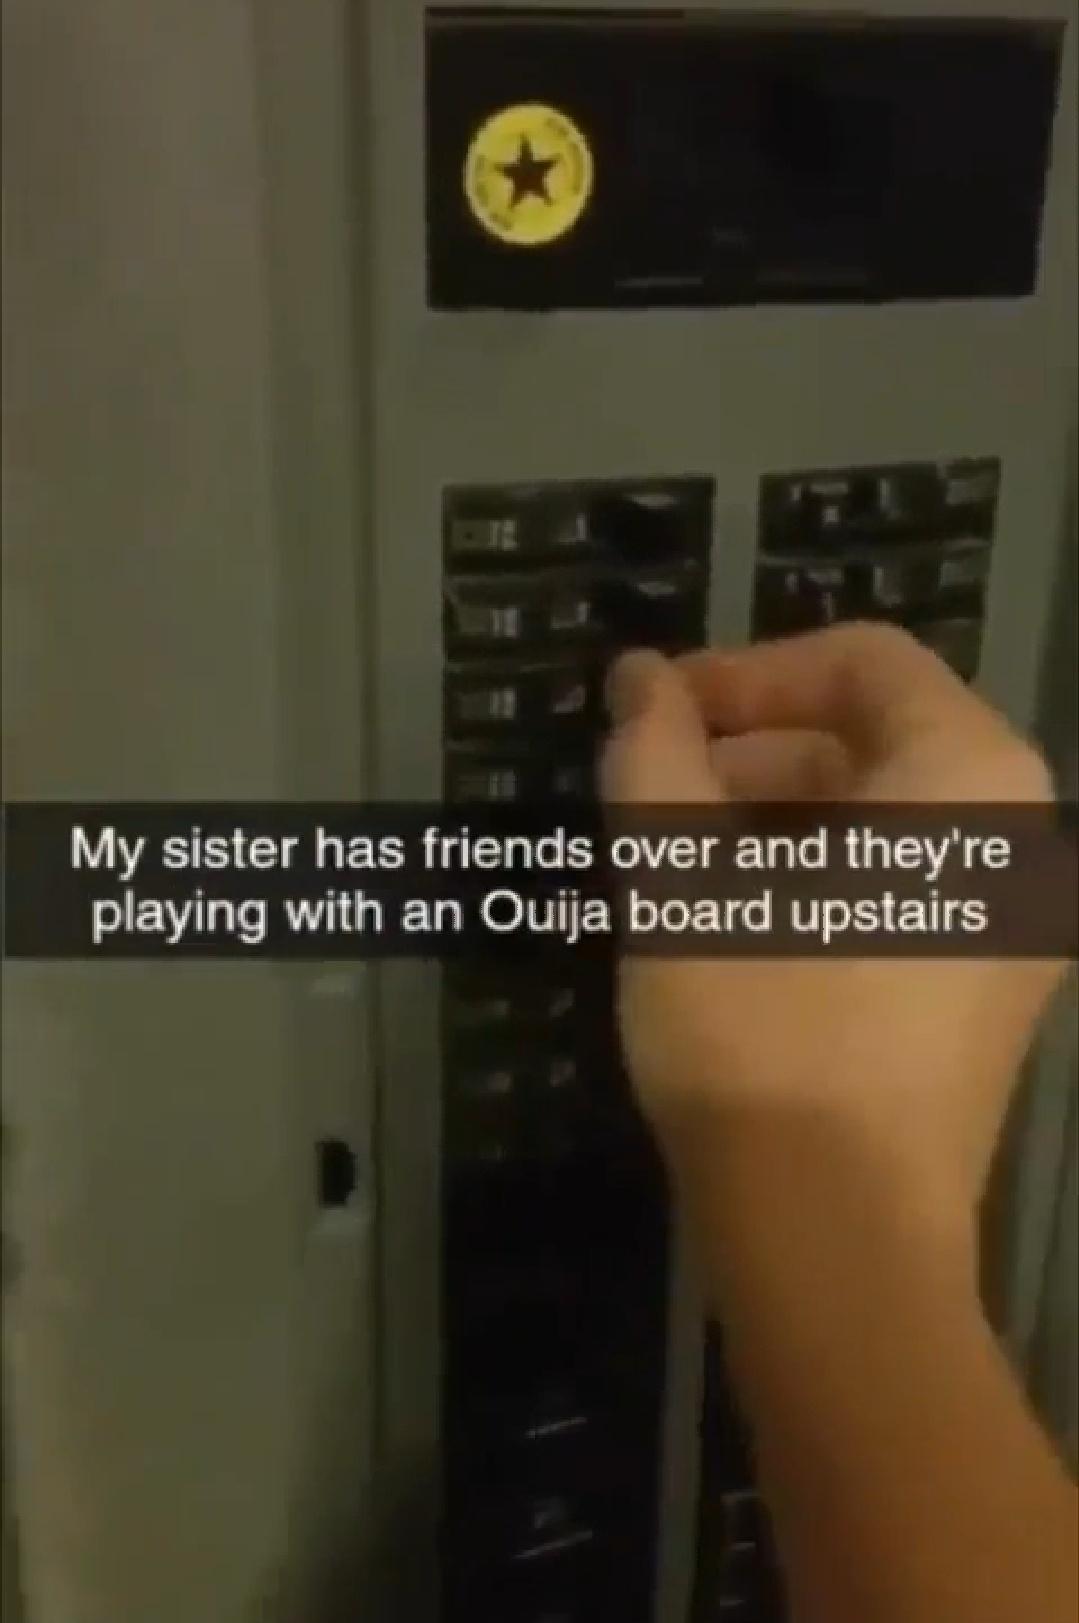 daily dose of randoms - breaker box meme - My sister has friends over and they're playing with an Ouija board upstairs